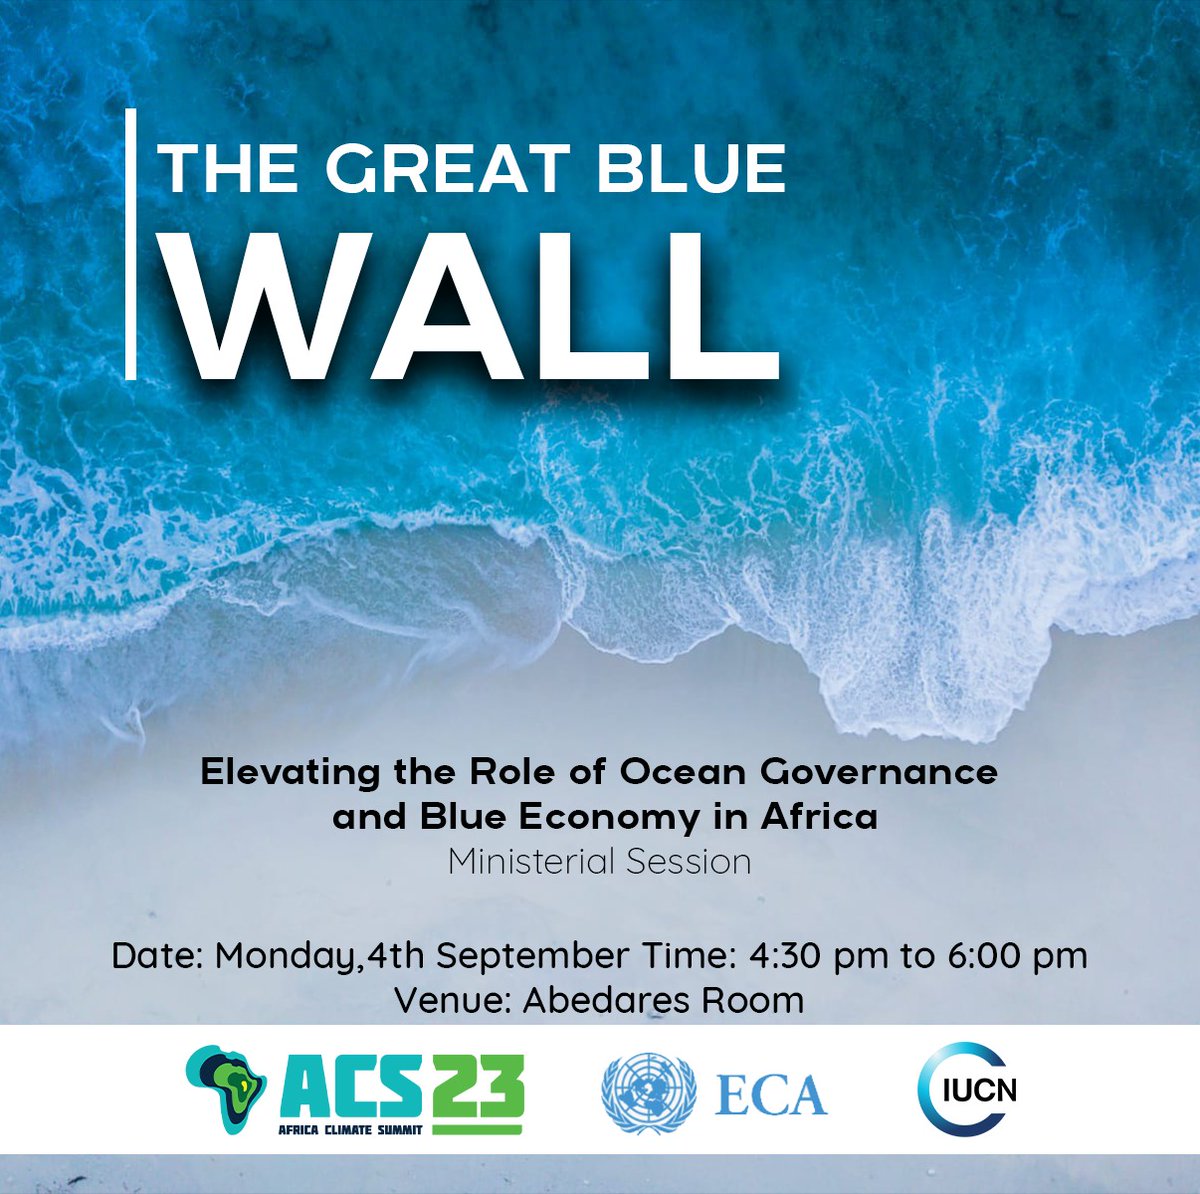 Join us at the Ministerial Session: 'The Great Blue Wall - Elevating the Role of Ocean Governance & Blue Economy in Africa.' 🌊 Discover how Africa is harnessing the power of its vast oceans for sustainable development and climate resilience. #AfricaClimateSummit #BlueEconomy